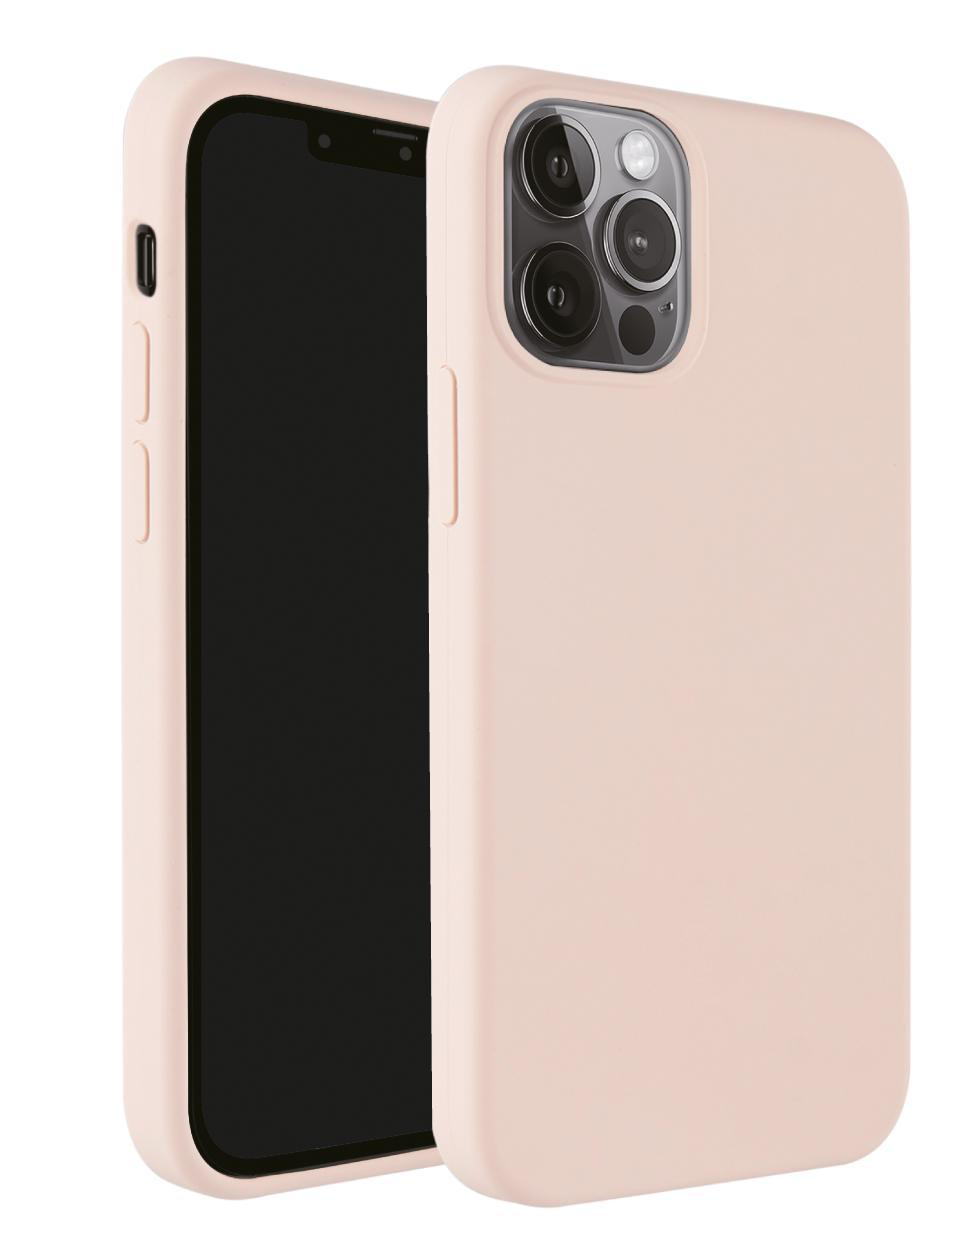 VIVANCO Hype iPhone Cover, Pink-Sand 13 Backcover, Apple, Pro